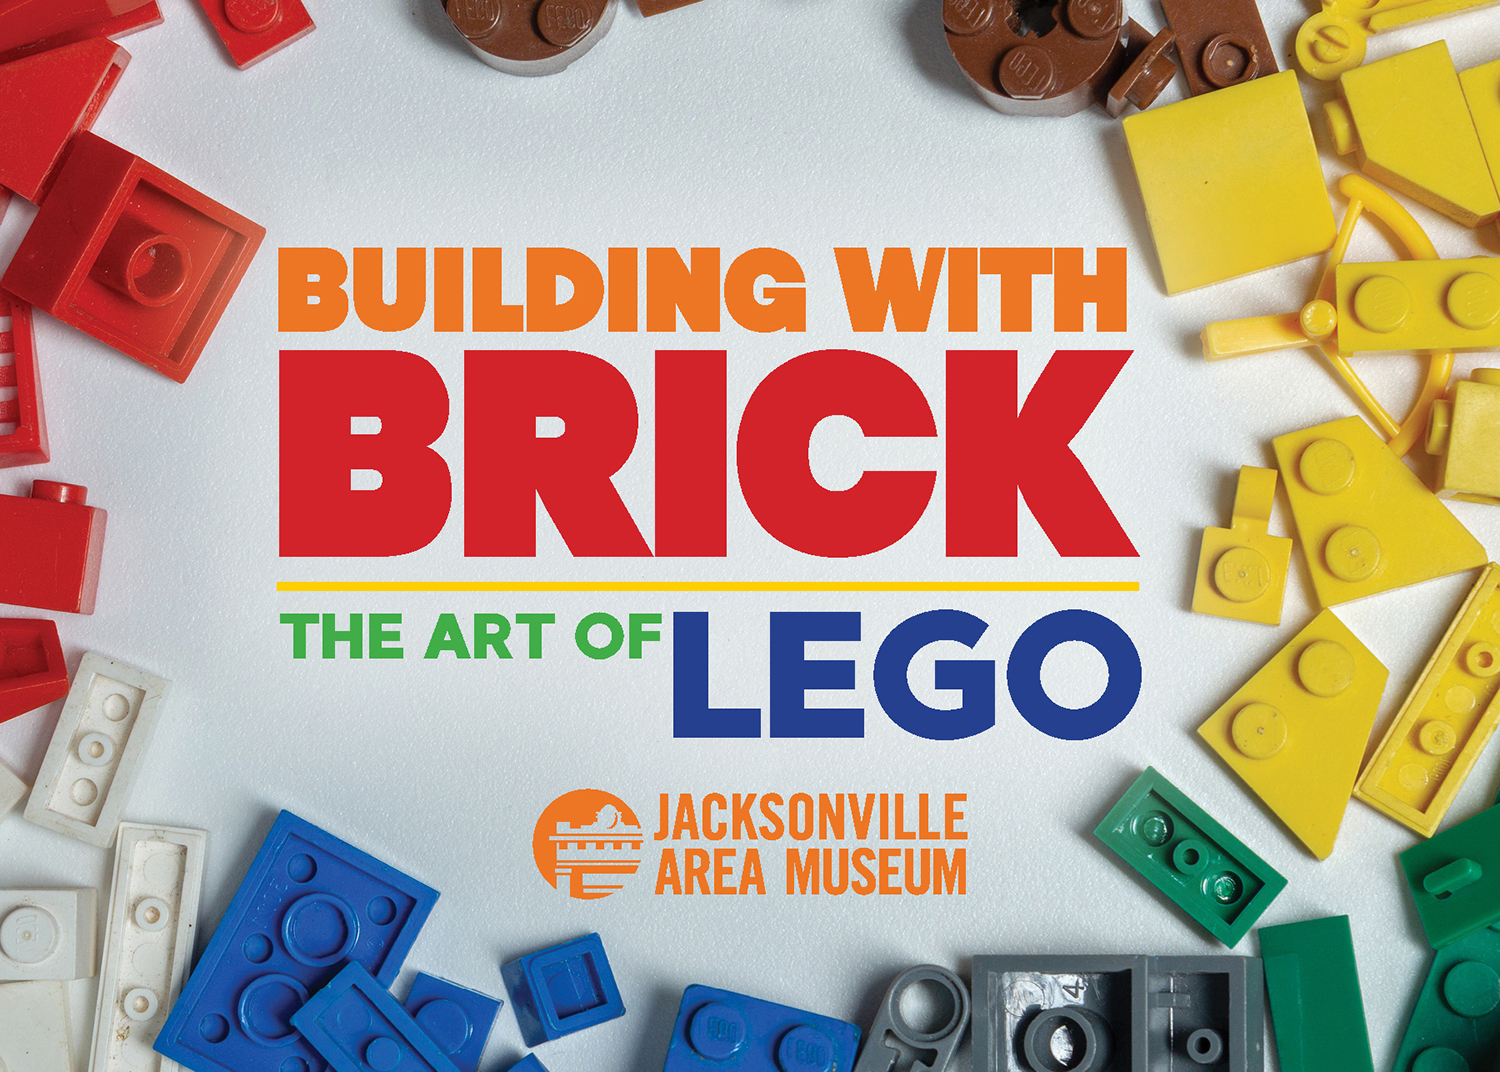 Building with Brick, The Art of Lego